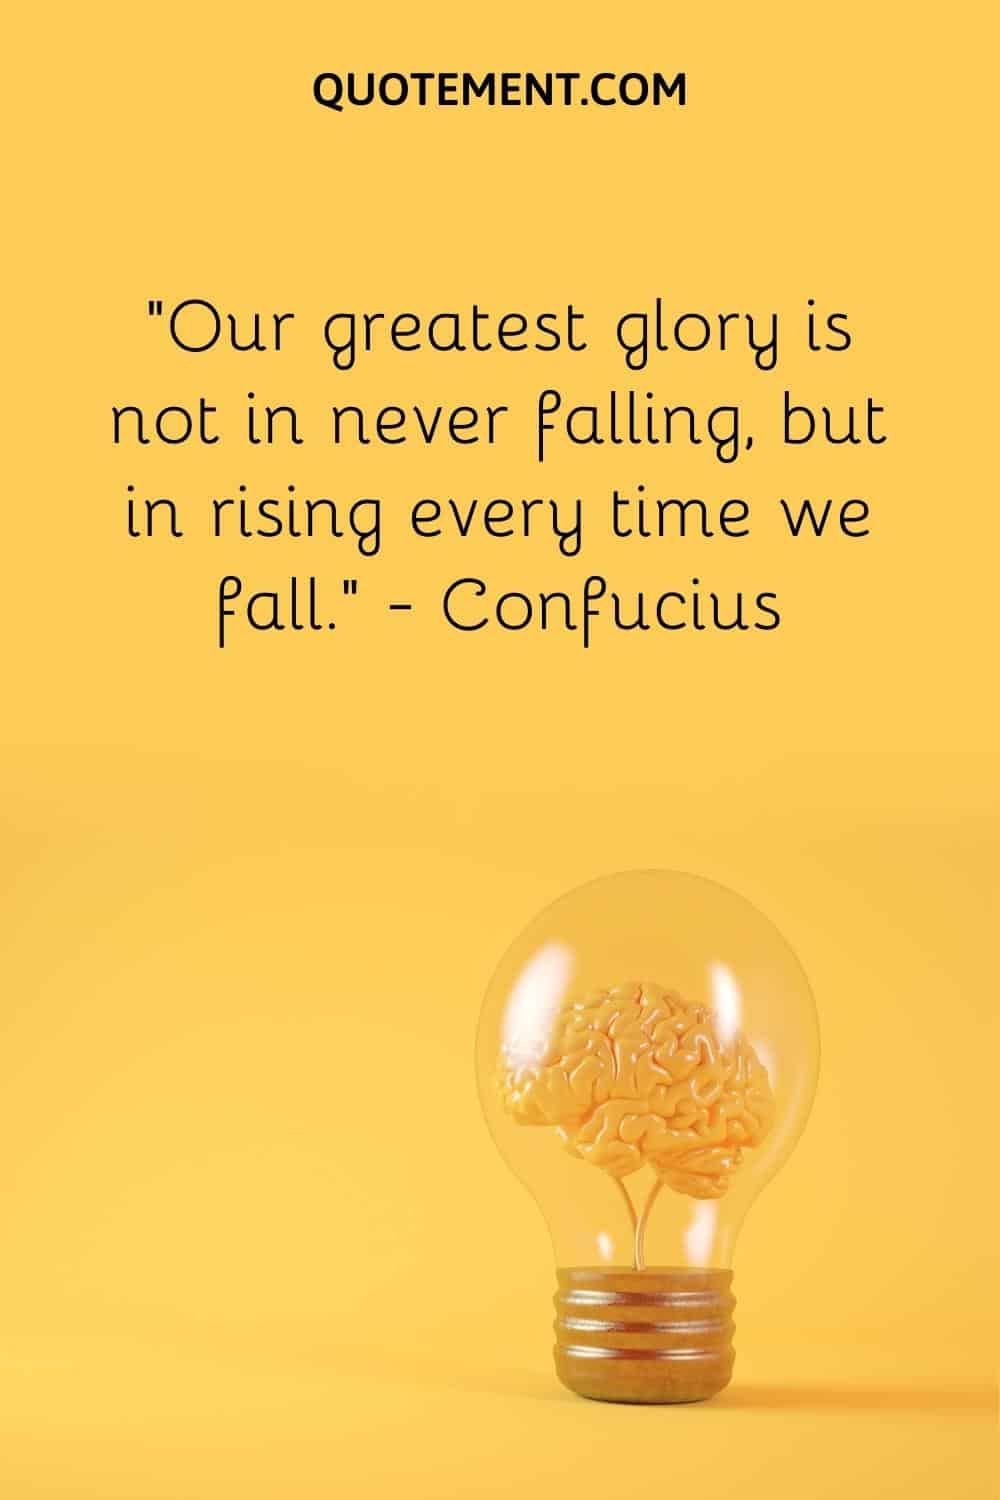 “Our greatest glory is not in never falling, but in rising every time we fall.” — Confucius